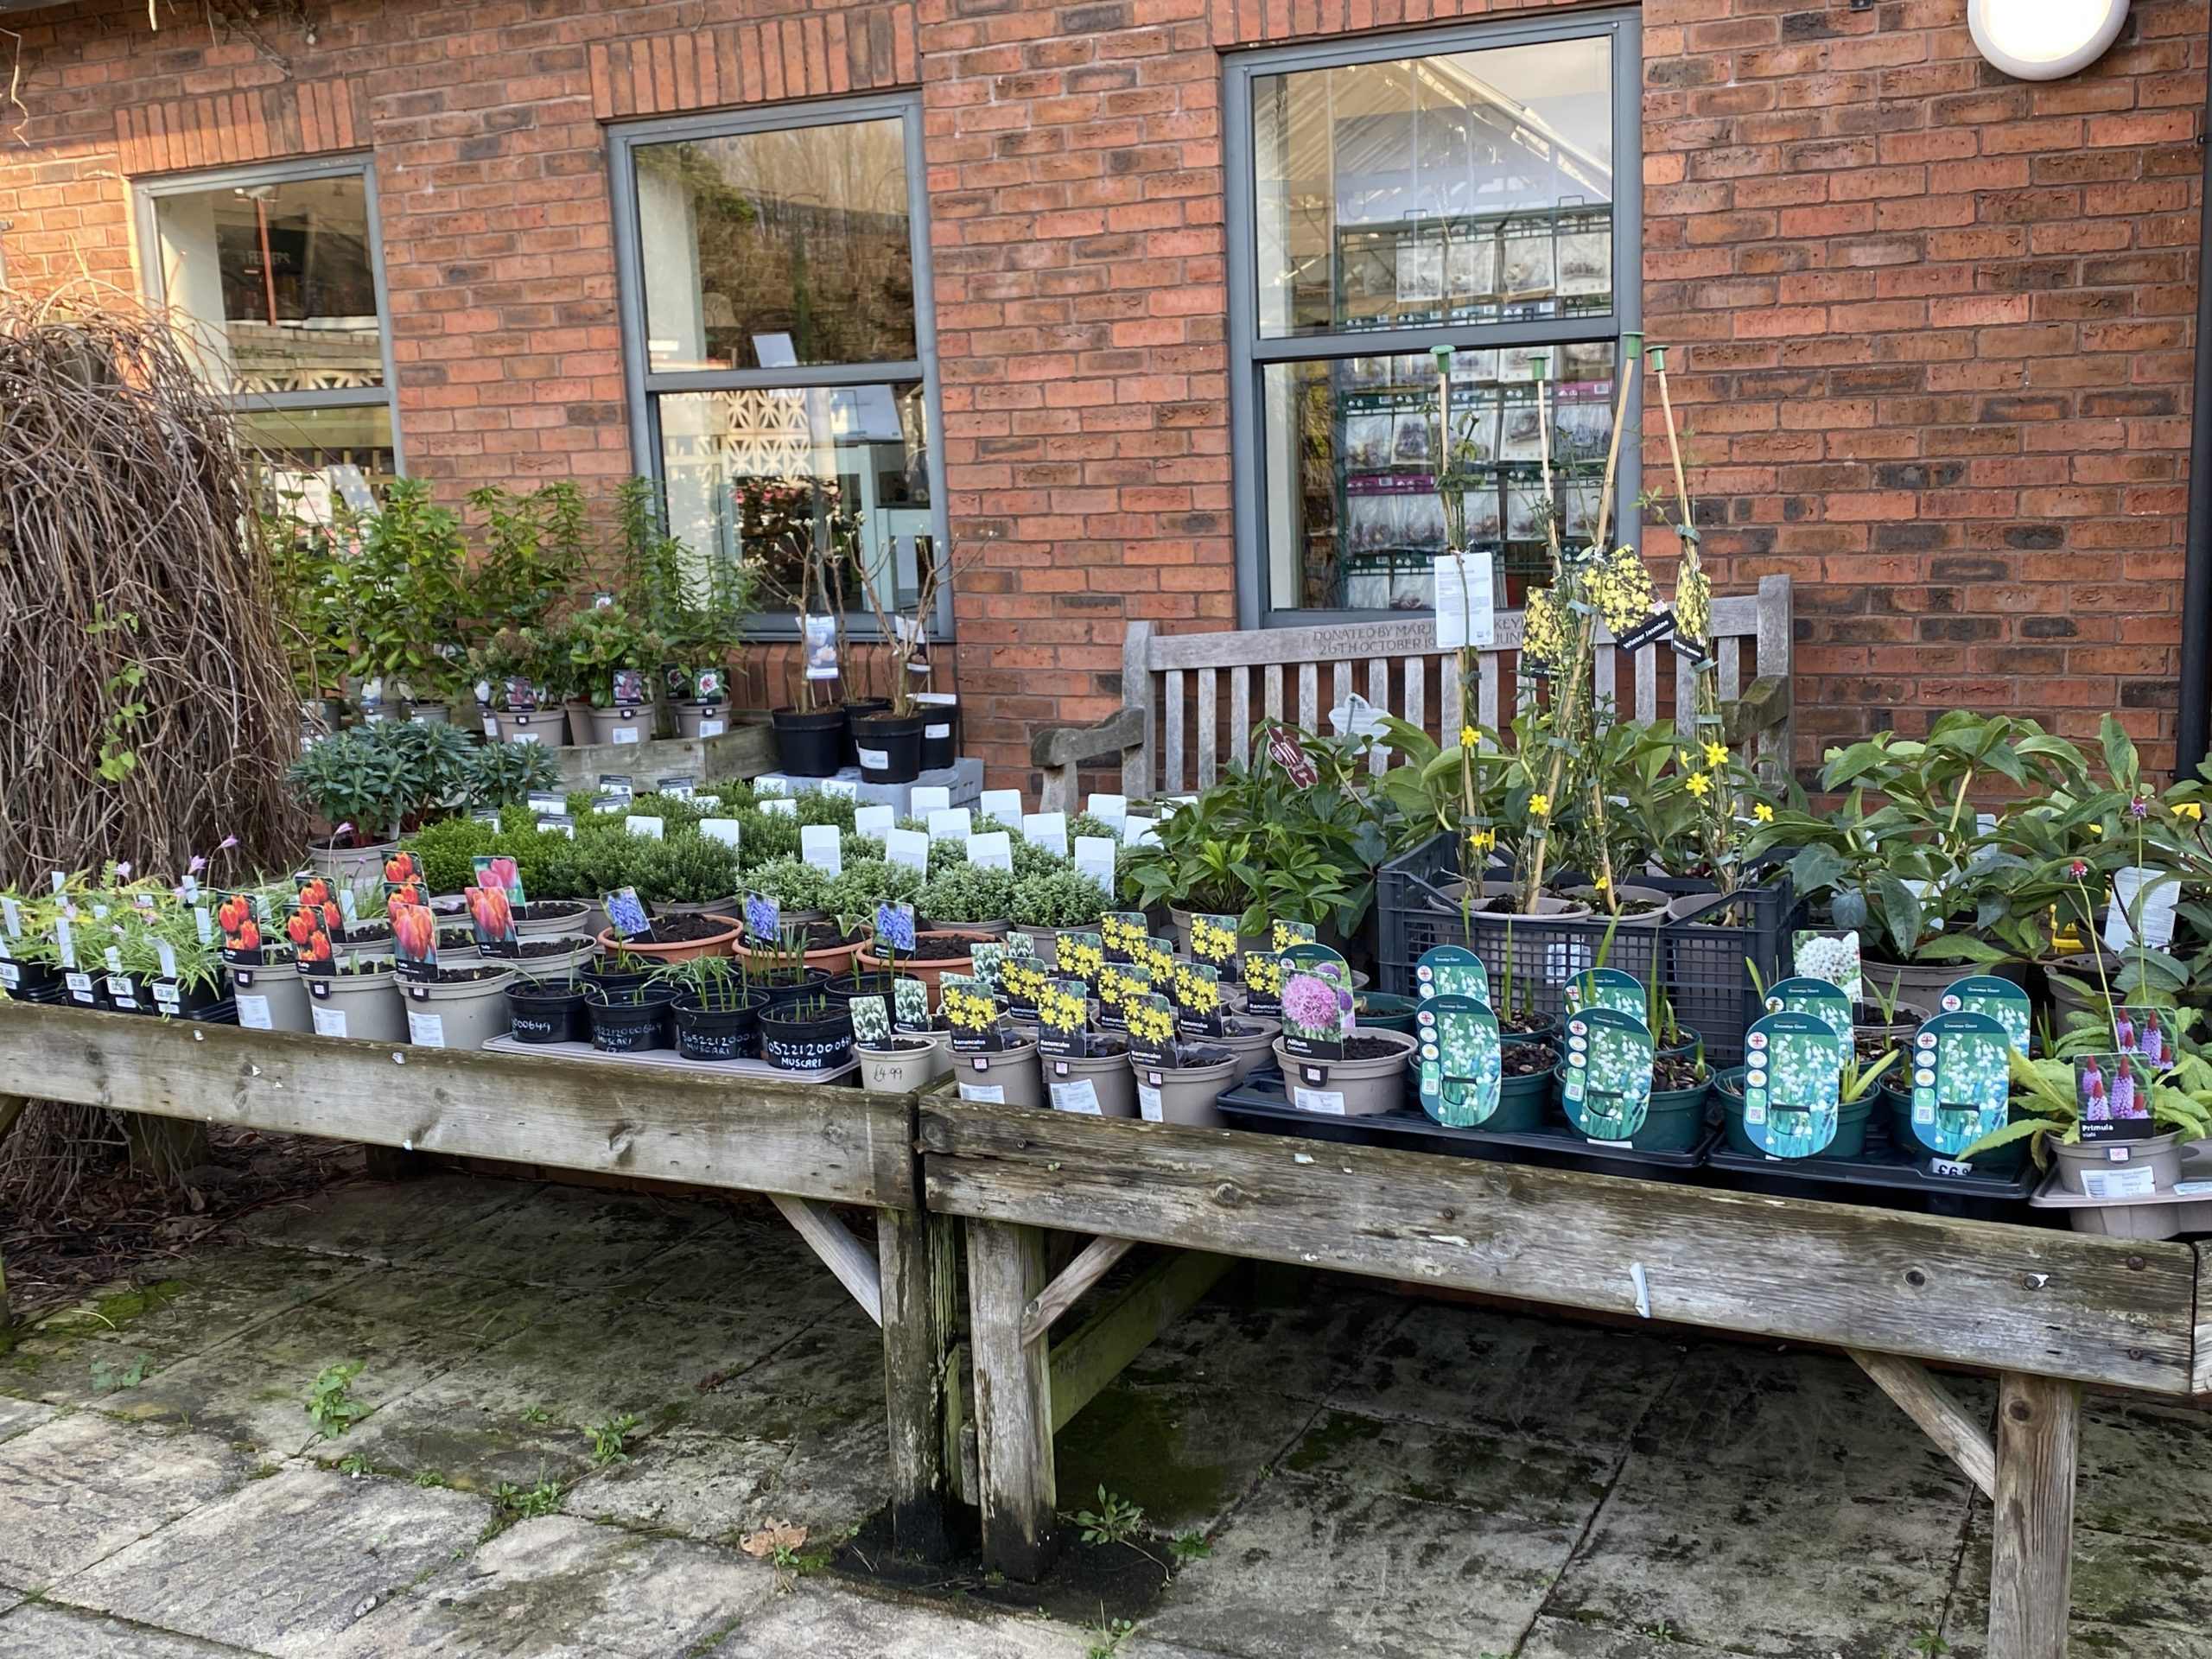 Plants for Sale at the Gardens